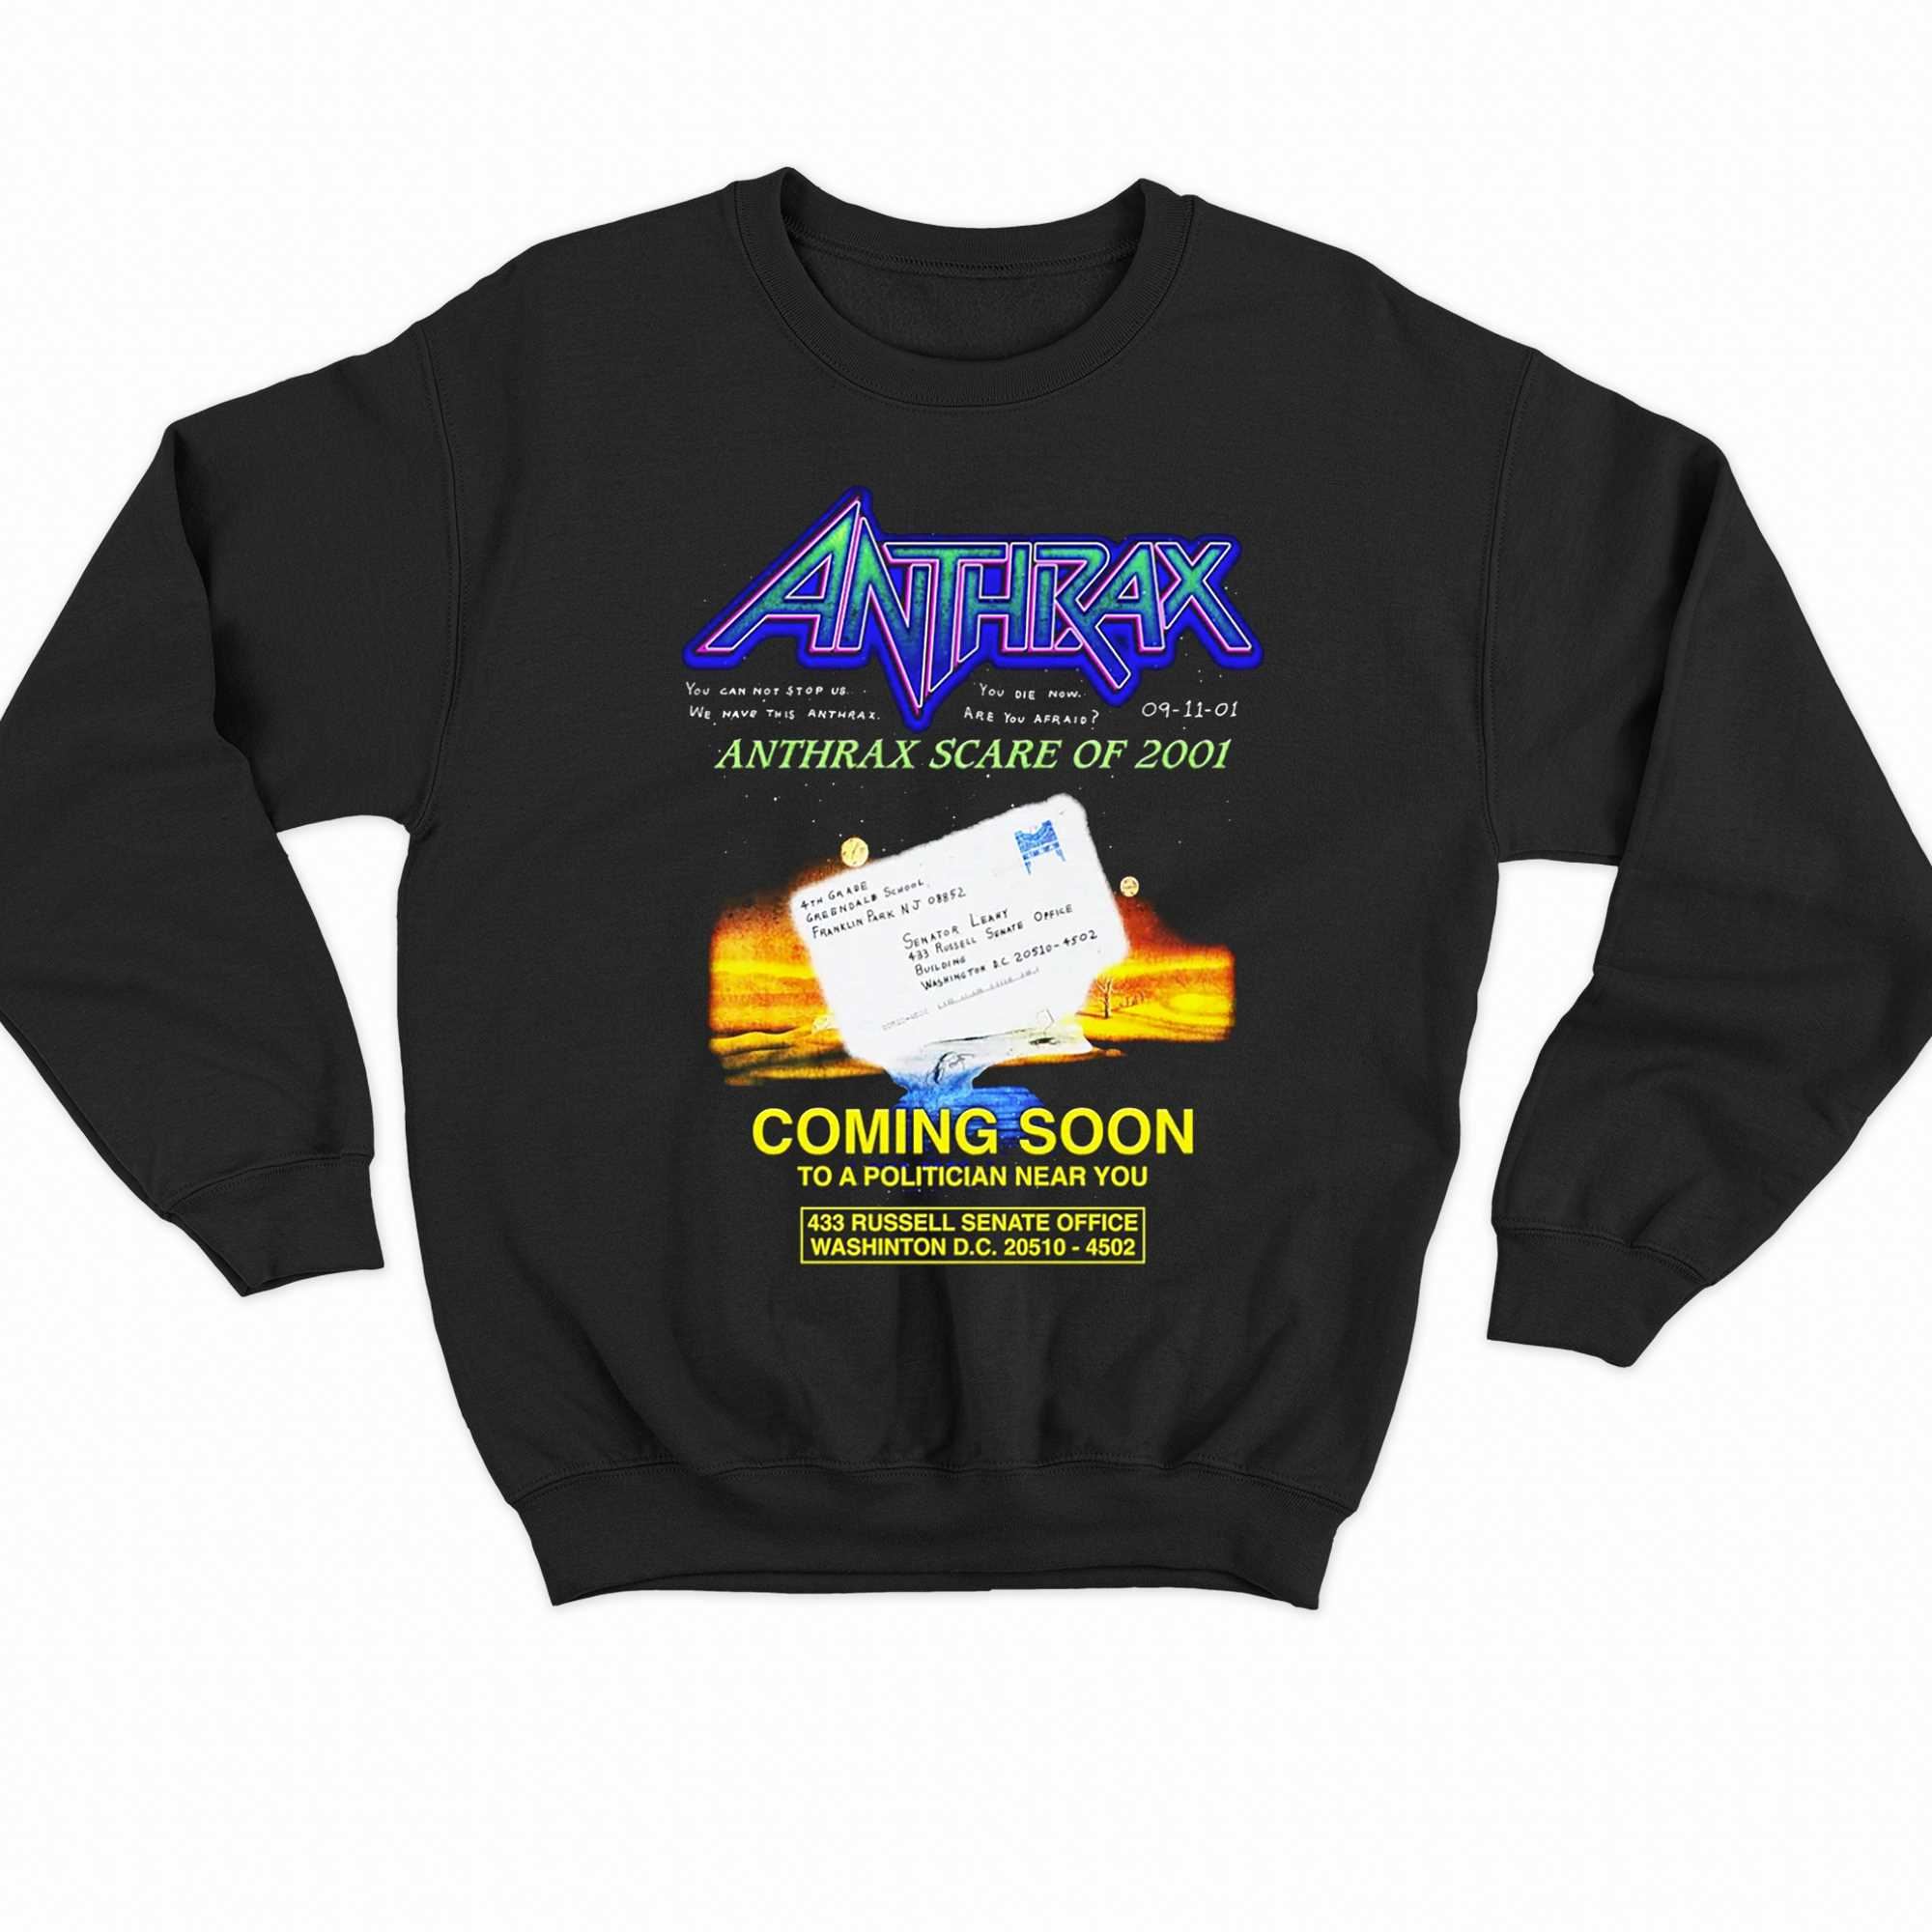 Anthrax Scare Of 2001 Shirt 